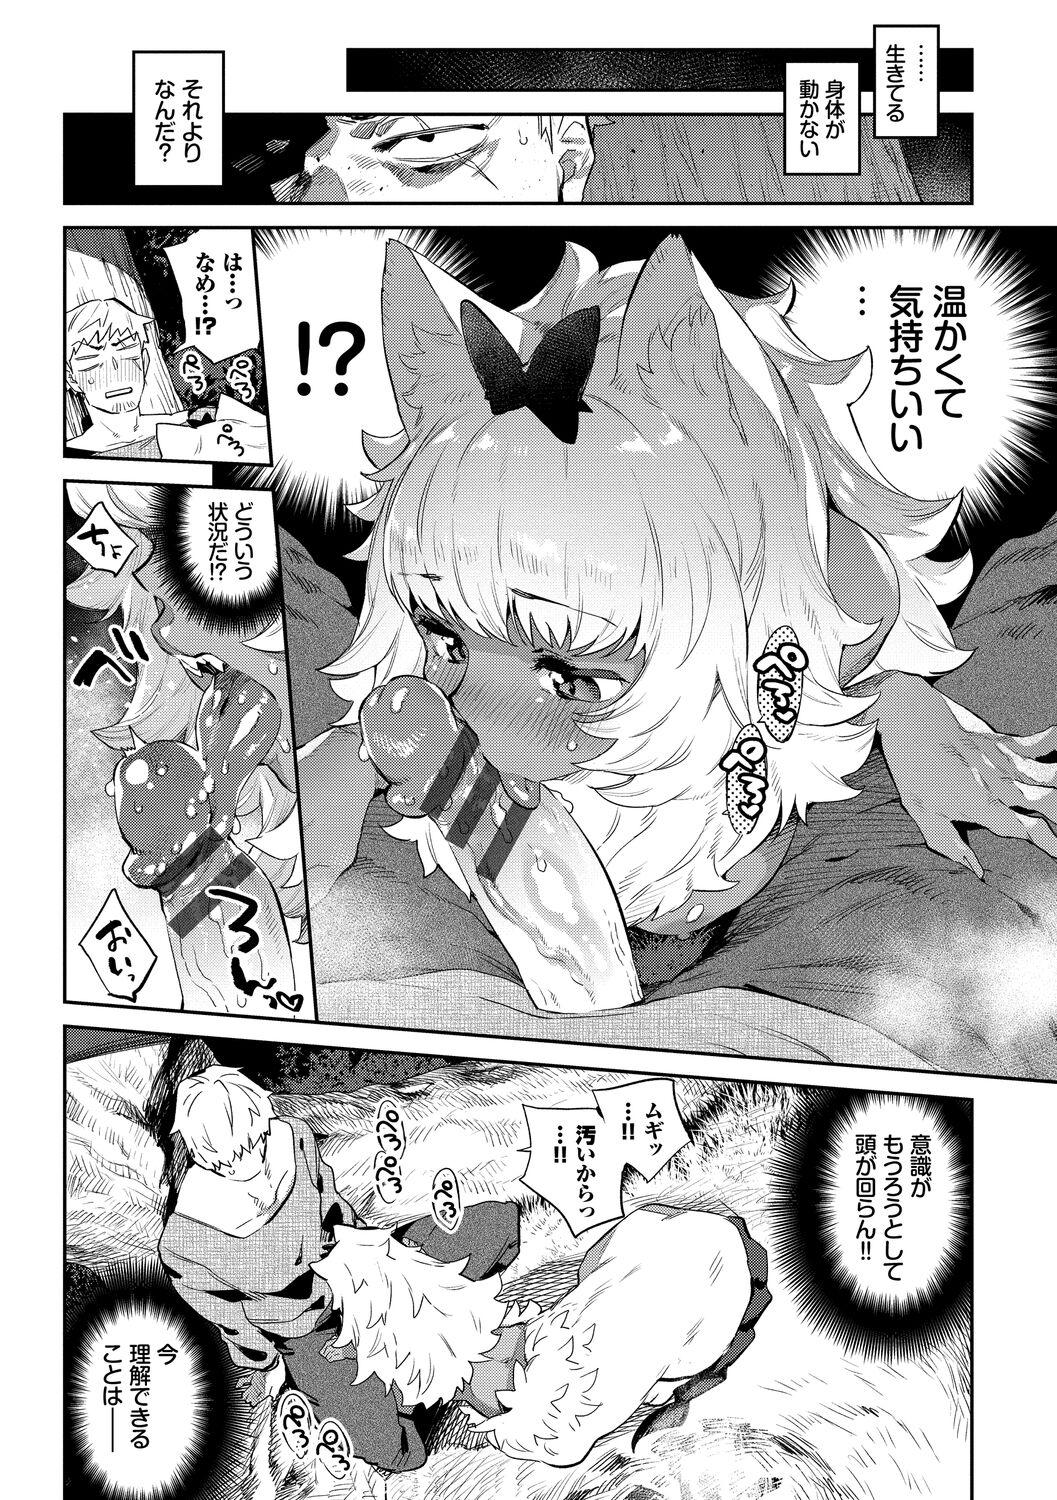 Ihou no Otome - Monster Girls in Another World 39